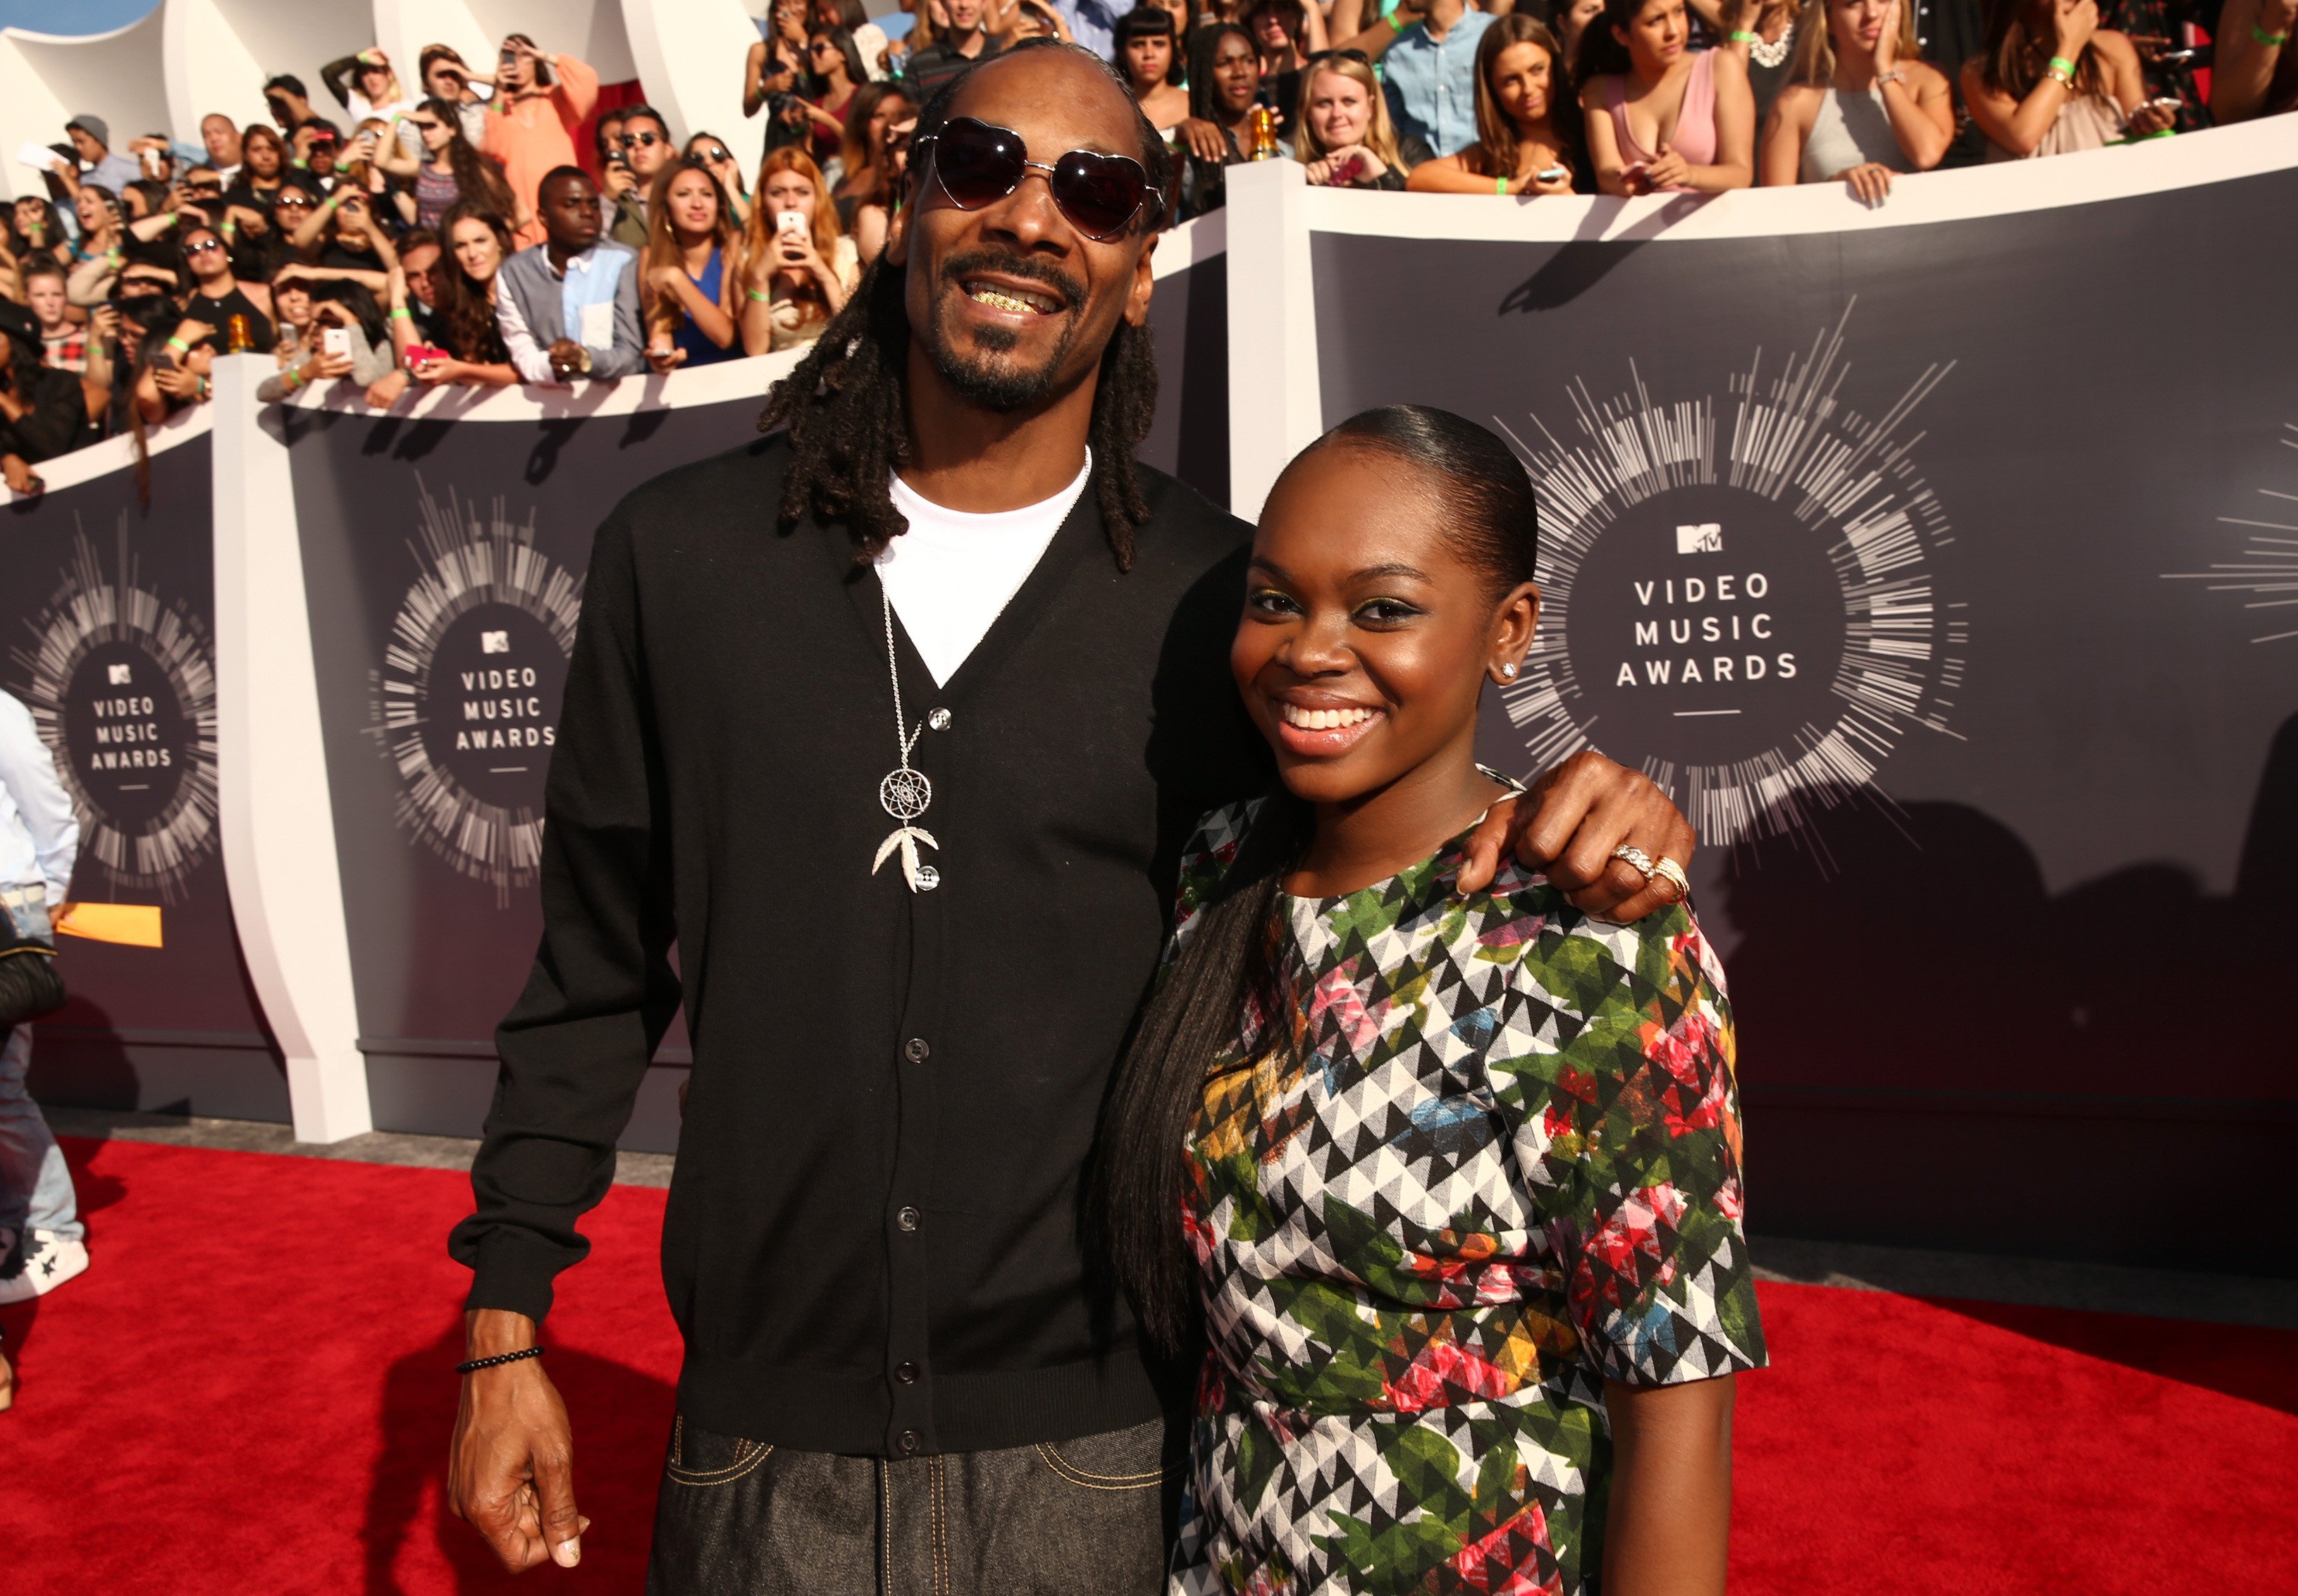  Snoop Dogg and Cori Broadus pictured at the 2014 MTV Video Music Awards on August 24, 2014 in Inglewood, California. | Source: Getty Images